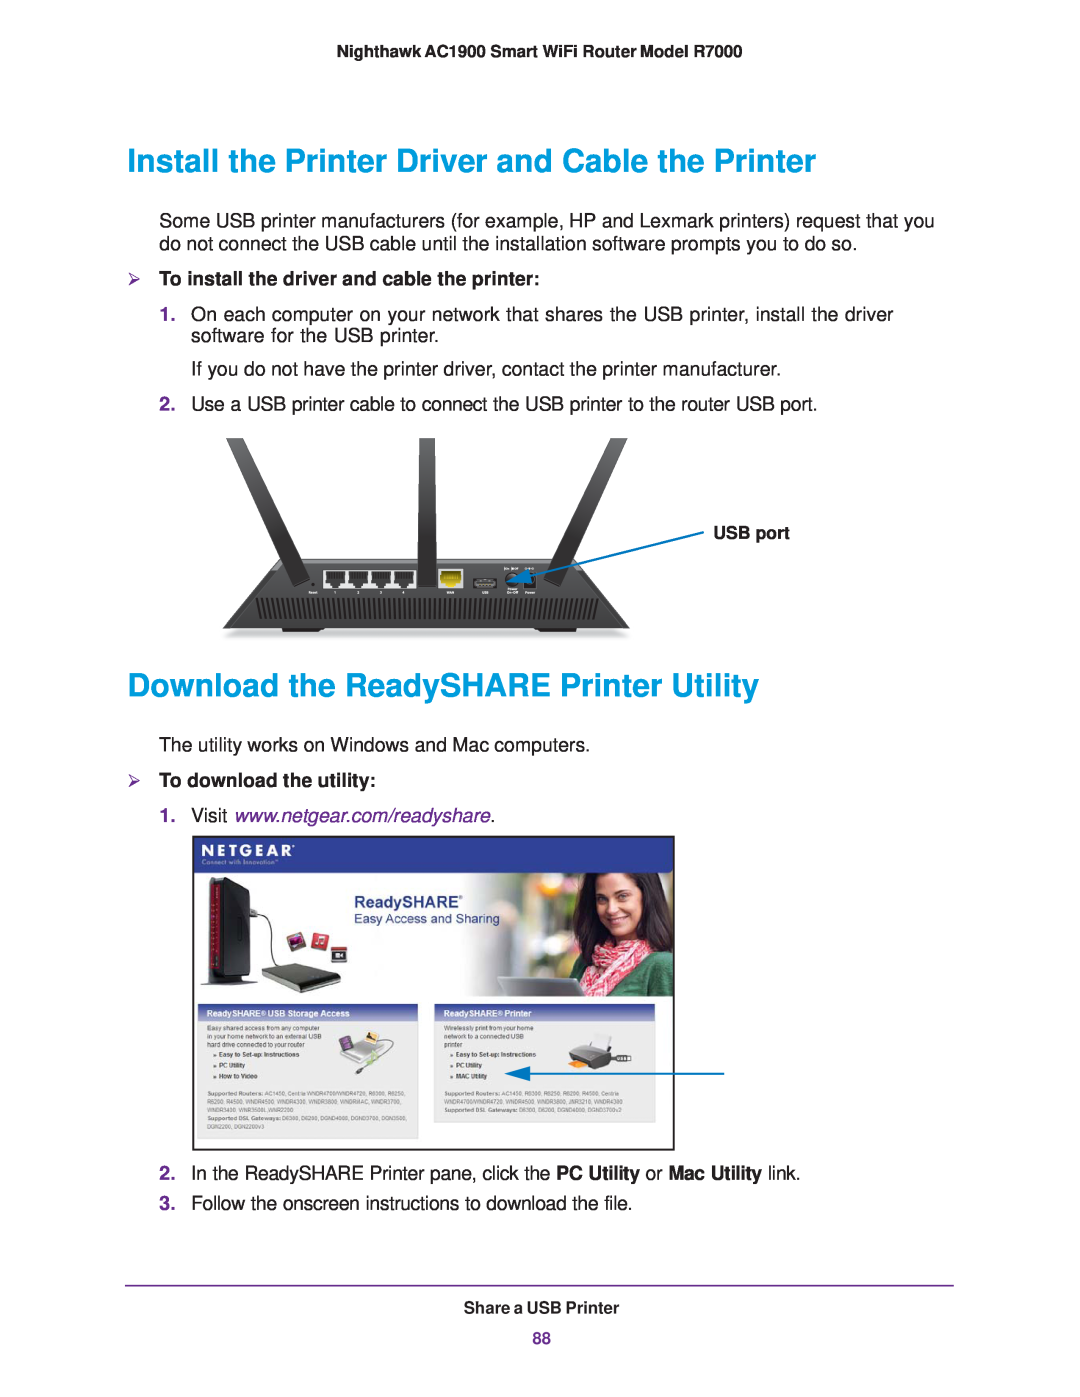 NETGEAR R7000 user manual Install the Printer Driver and Cable the Printer, Download the ReadySHARE Printer Utility 